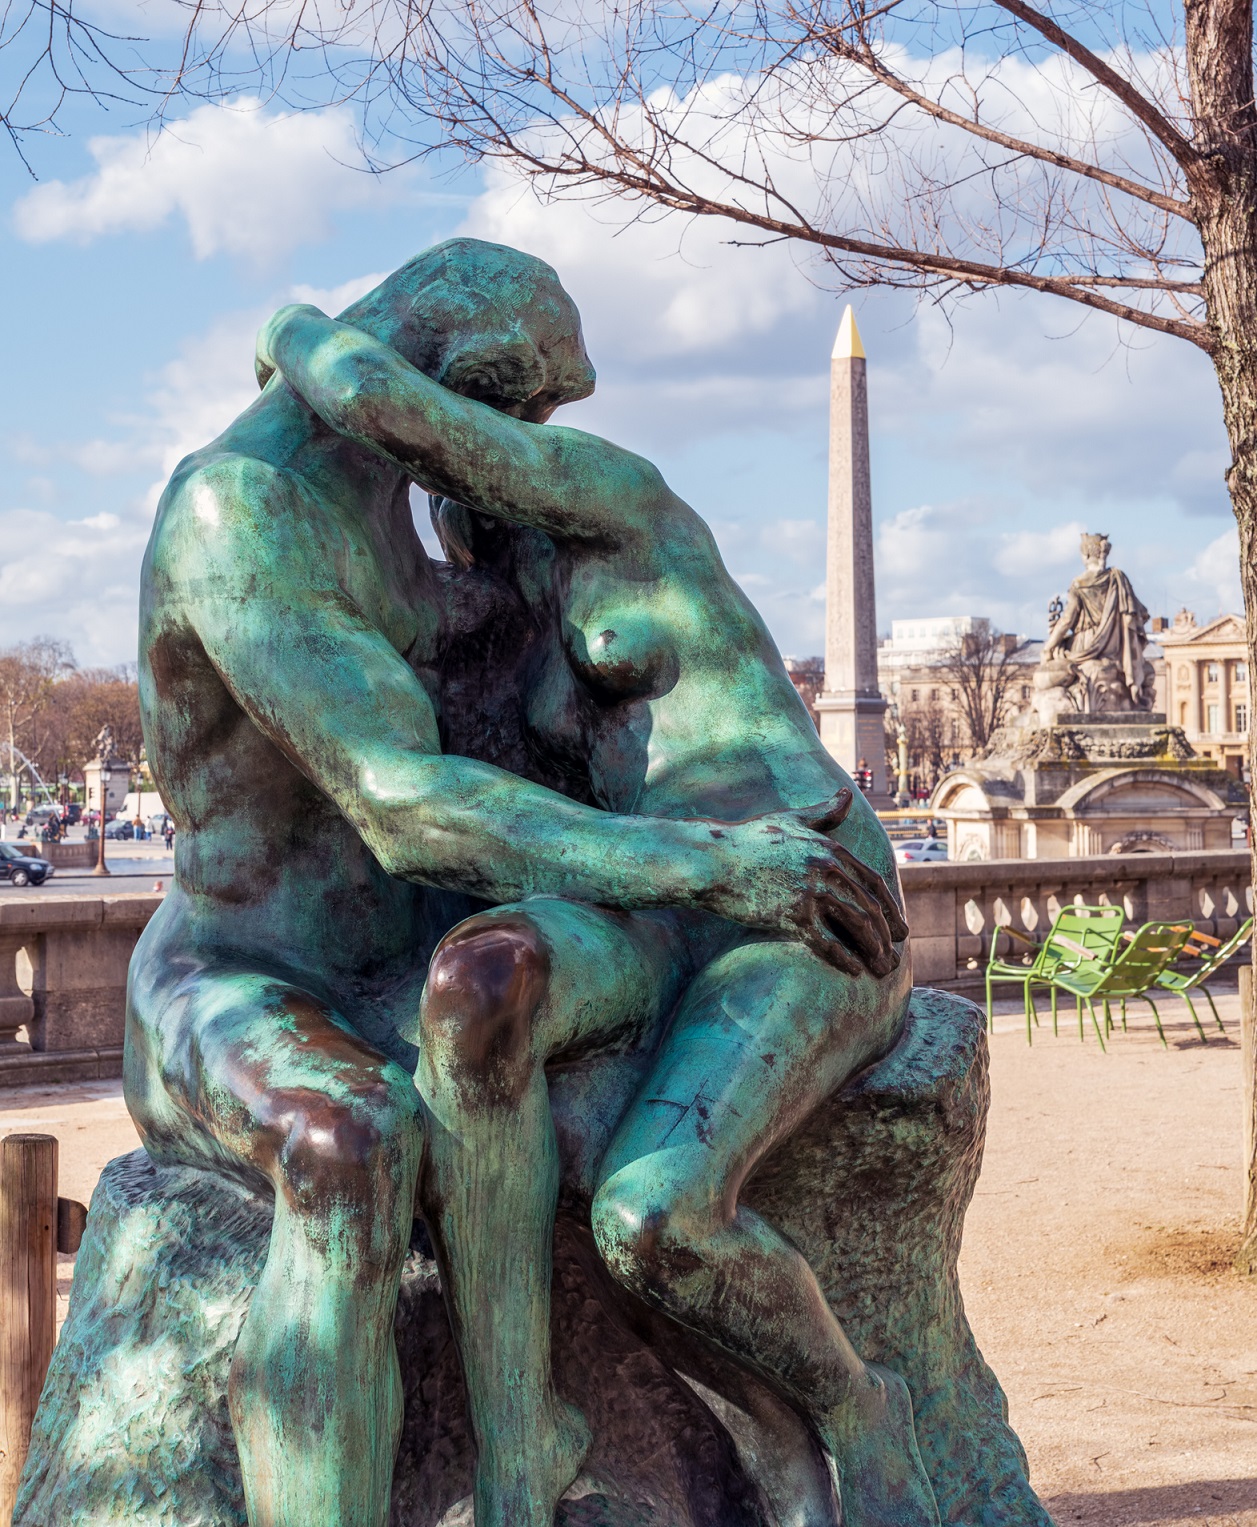 Bronze statue The Kiss by Auguste Rodin (1882) in the Tuileries Garden with Egyptian obelisk in background - Paris, France